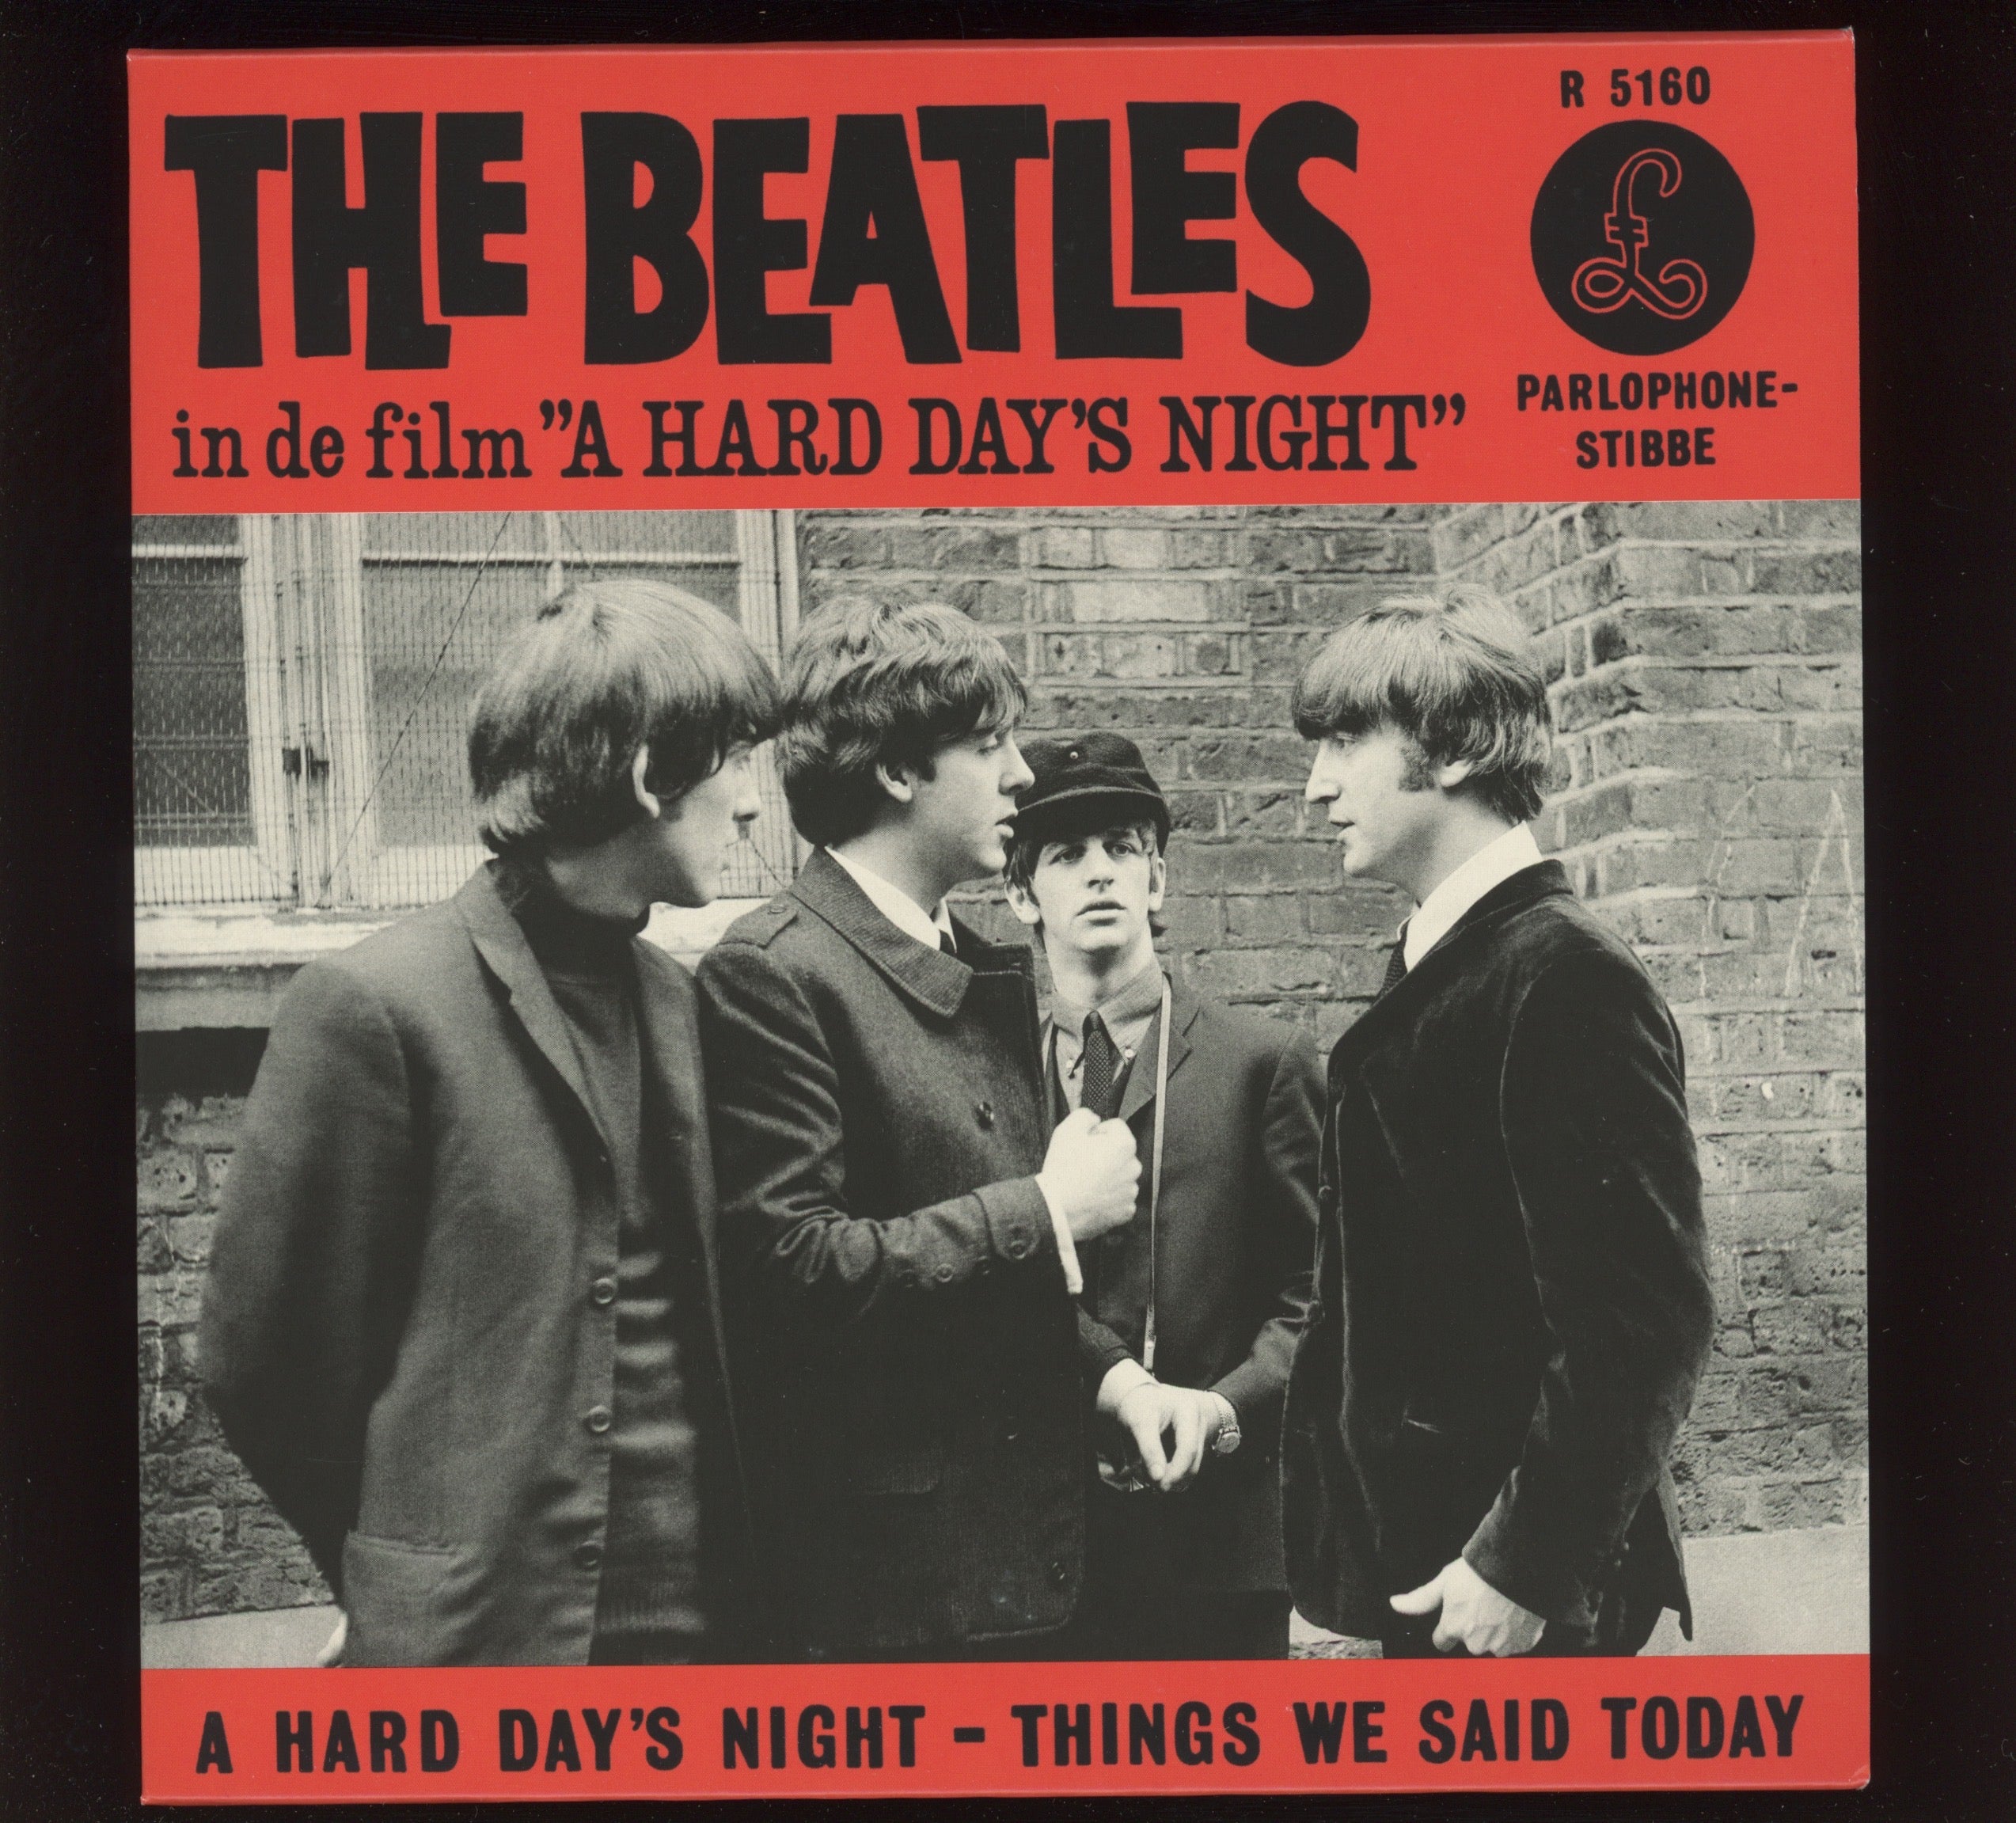 The Beatles - A Hard Day's Night / Things We Said Today on Parlophone 7" Reissue With Picture Cover